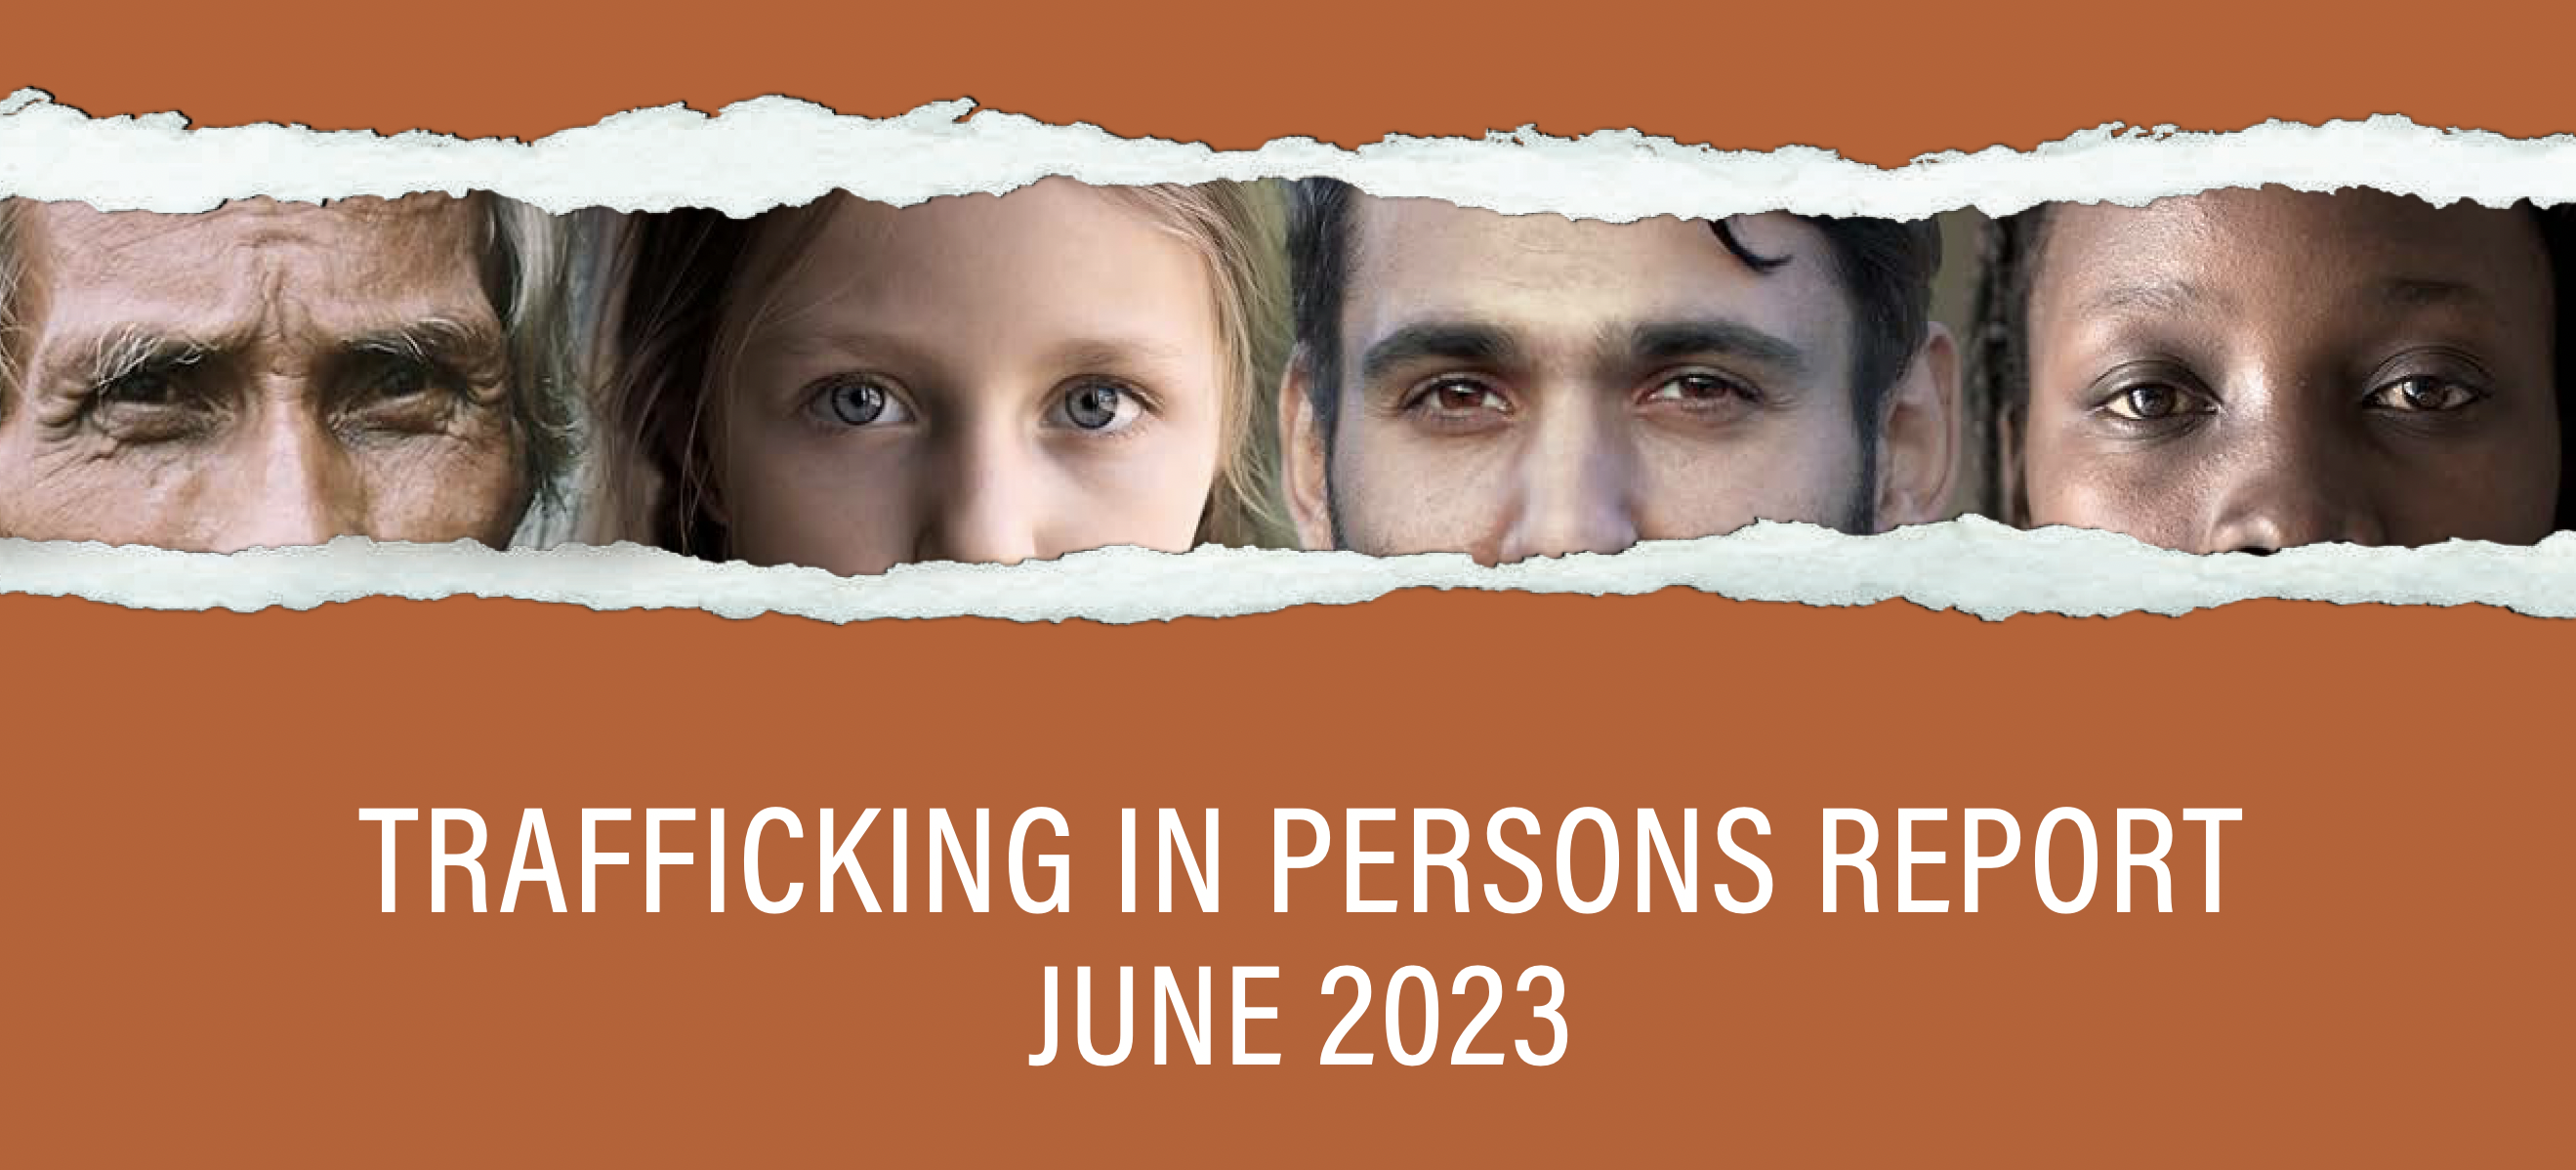 TRAFFICKING IN PERSONS REPORT JUNE 2023 – Department of State of the United States of America